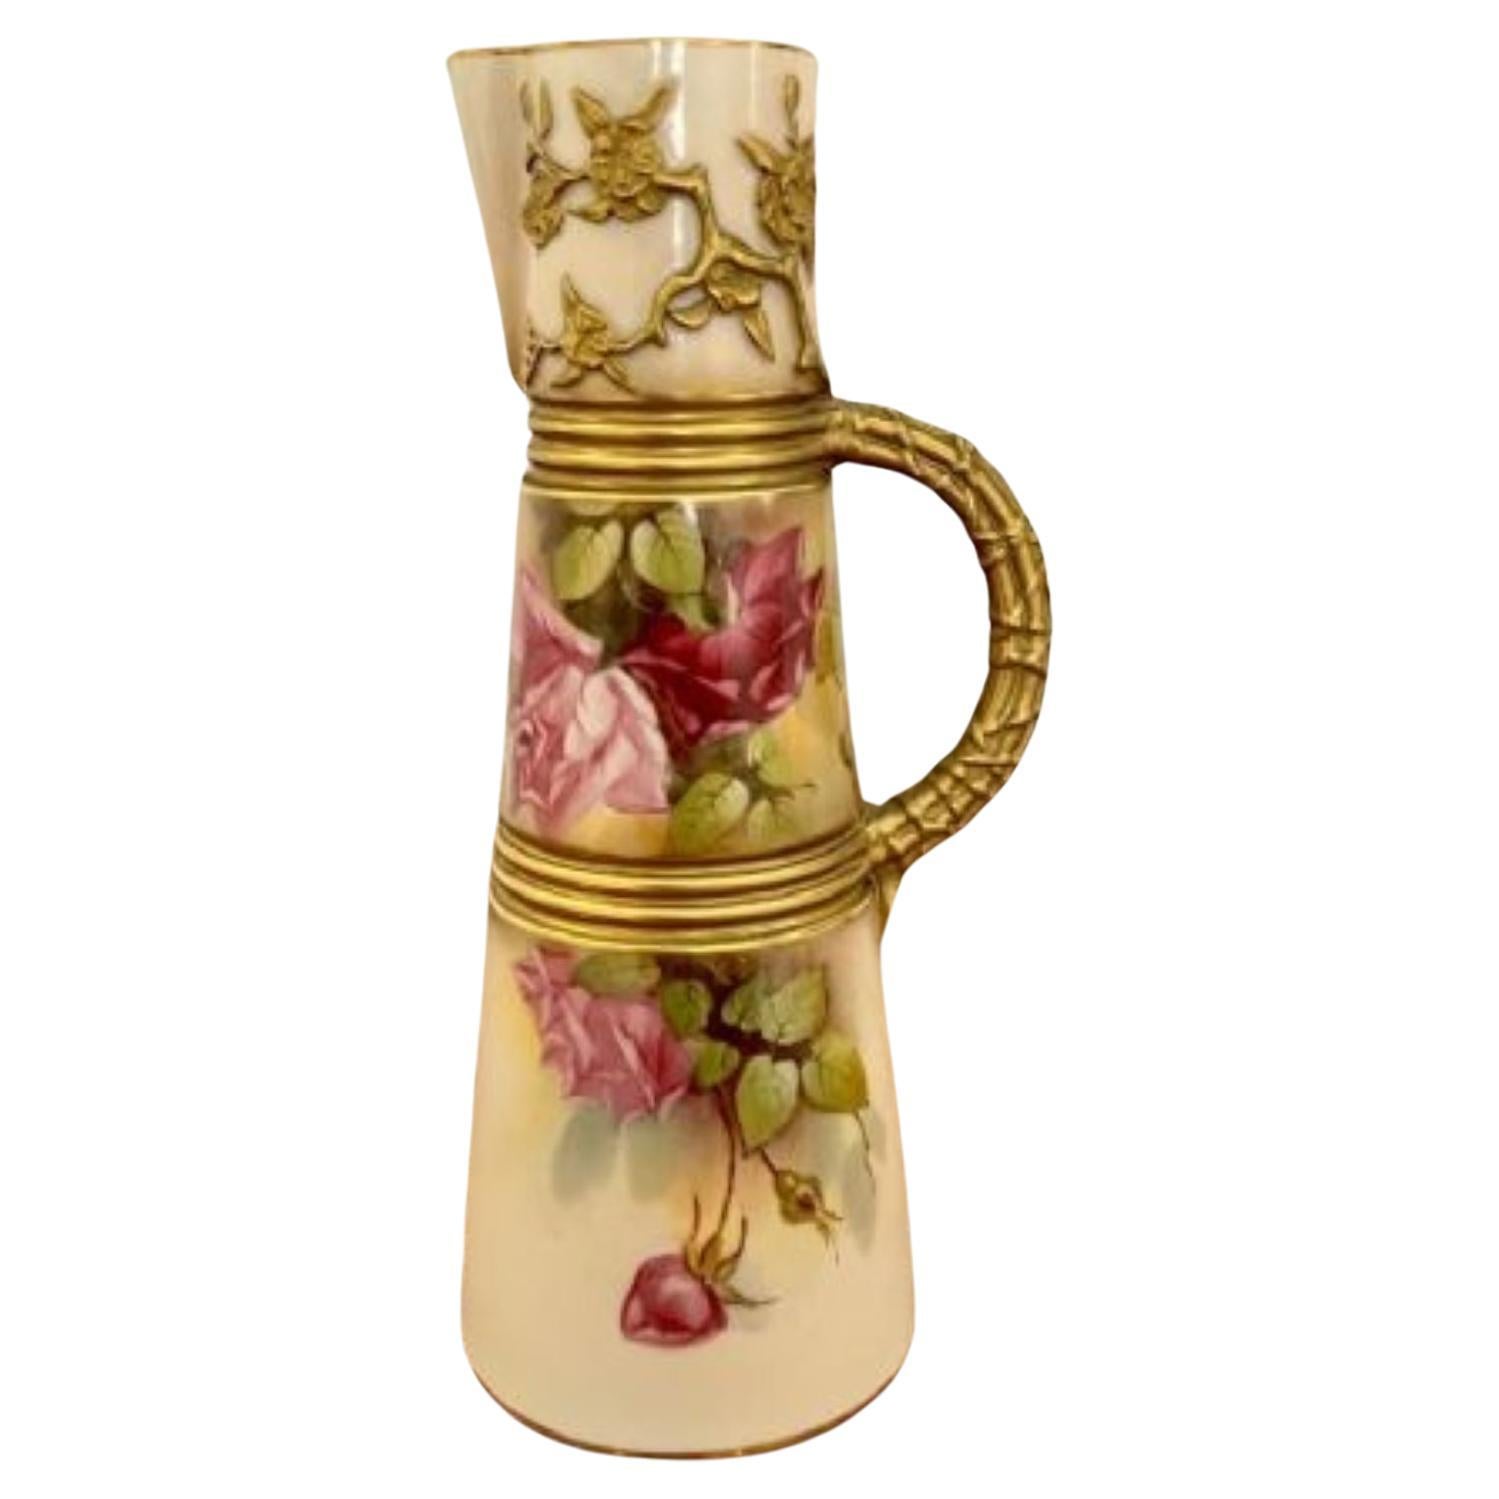 Quality antique Royal Worcester wine ewer For Sale